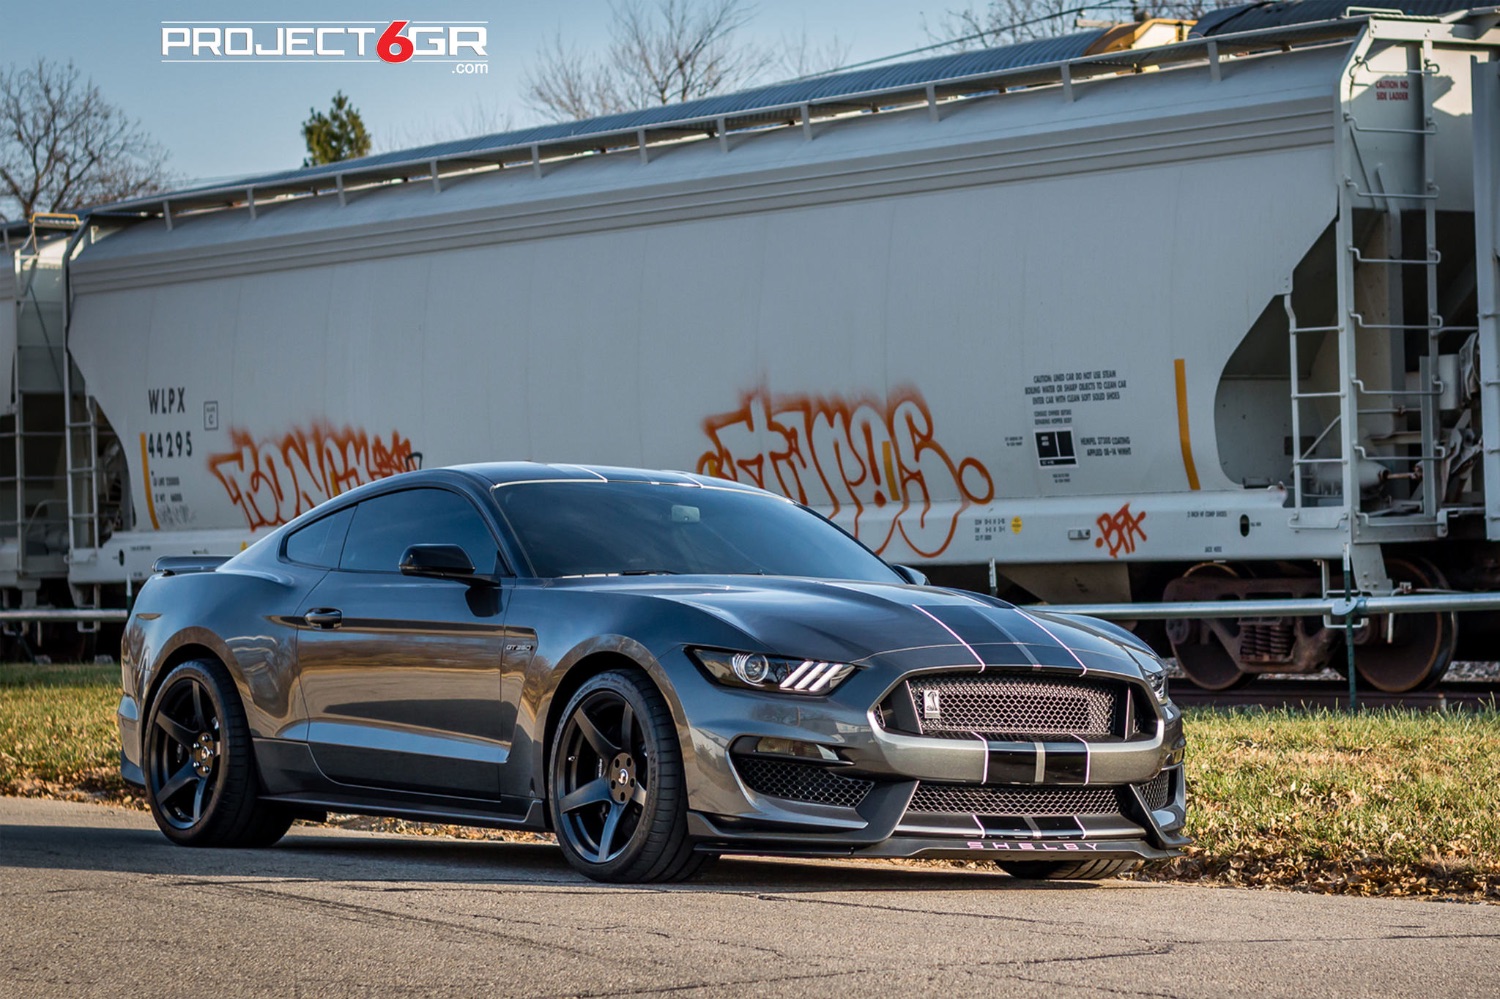 project-6gr-5-spoke-ford-shelby-gt350-satin-black-mustang-02